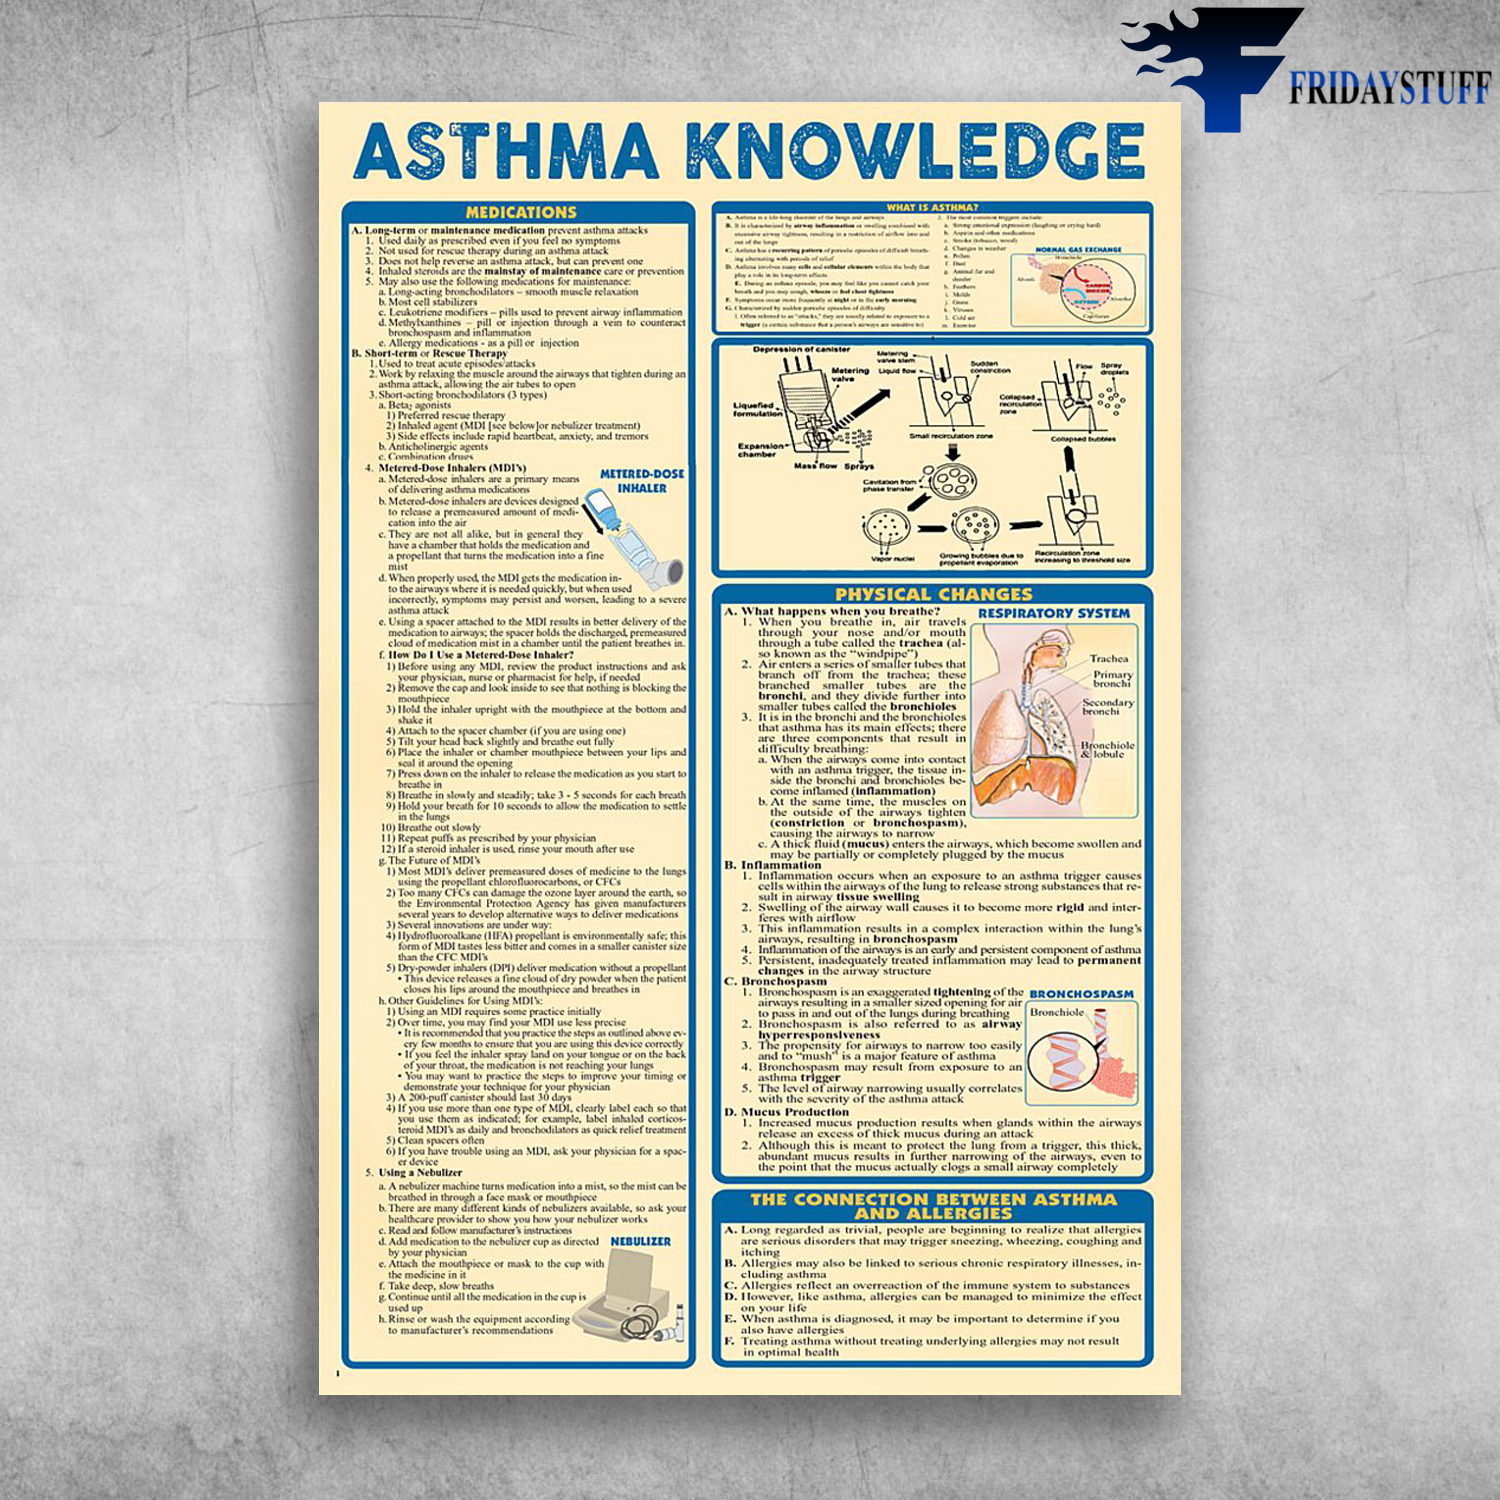 Asthma Is A Long Term Disease Of The Lungs Asthma Knowledge